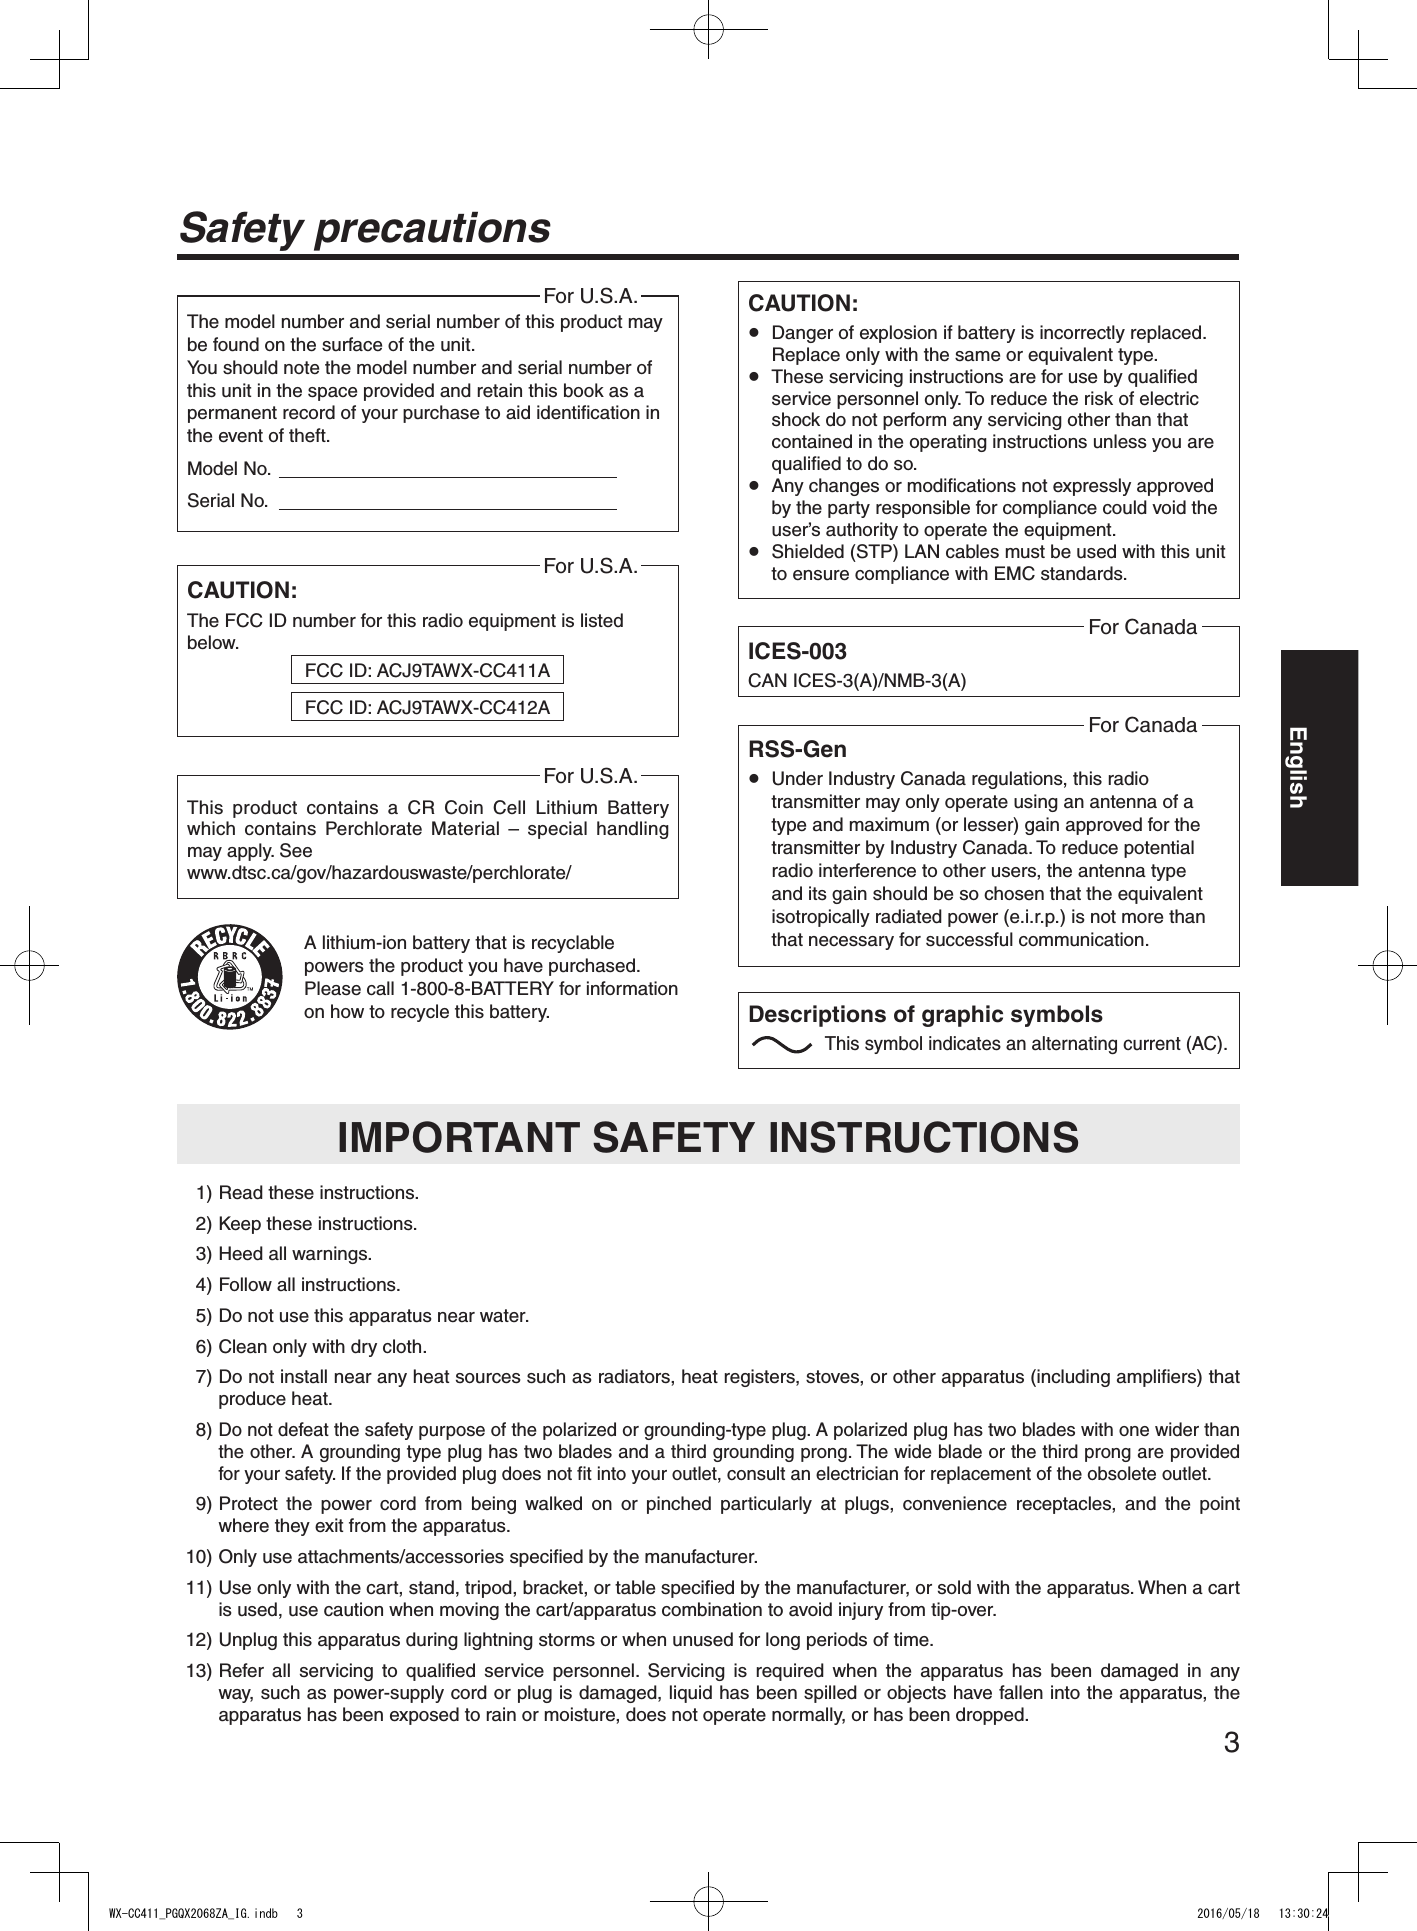 3EnglishSafety precautionsCAUTION: Danger of explosion if battery is incorrectly replaced. Replace only with the same or equivalent type. These servicing instructions are for use by qualified service personnel only. To reduce the risk of electric shock do not perform any servicing other than that contained in the operating instructions unless you are qualified to do so. Any changes or modifications not expressly approved by the party responsible for compliance could void the user’s authority to operate the equipment. Shielded (STP) LAN cables must be used with this unit to ensure compliance with EMC standards.ICES-003CAN ICES-3(A)/NMB-3(A)For CanadaA lithium-ion battery that is recyclable powers the product you have purchased. Please call 1-800-8-BATTERY for information on how to recycle this battery.  1) Read these instructions.  2) Keep these instructions.  3) Heed all warnings.  4) Follow all instructions.  5) Do not use this apparatus near water.  6) Clean only with dry cloth.  7)  Do not install near any heat sources such as radiators, heat registers, stoves, or other apparatus (including amplifiers) that produce heat.  8)  Do not defeat the safety purpose of the polarized or grounding-type plug. A polarized plug has two blades with one wider than the other. A grounding type plug has two blades and a third grounding prong. The wide blade or the third prong are provided for your safety. If the provided plug does not fit into your outlet, consult an electrician for replacement of the obsolete outlet.  9)  Protect the power cord from being walked on or pinched particularly at plugs, convenience receptacles, and the point where they exit from the apparatus.  10)  Only use attachments/accessories specified by the manufacturer.  11)  Use only with the cart, stand, tripod, bracket, or table specified by the manufacturer, or sold with the apparatus. When a cart is used, use caution when moving the cart/apparatus combination to avoid injury from tip-over.  12)  Unplug this apparatus during lightning storms or when unused for long periods of time. 13)  Refer all servicing to qualified service personnel. Servicing is required when the apparatus has been damaged in any way, such as power-supply cord or plug is damaged, liquid has been spilled or objects have fallen into the apparatus, the apparatus has been exposed to rain or moisture, does not operate normally, or has been dropped.IMPORTANT SAFETY INSTRUCTIONSRSS-Gen Under Industry Canada regulations, this radio transmitter may only operate using an antenna of a type and maximum (or lesser) gain approved for the transmitter by Industry Canada. To reduce potential radio interference to other users, the antenna type and its gain should be so chosen that the equivalent isotropically radiated power (e.i.r.p.) is not more than that necessary for successful communication.For CanadaThis product contains a CR Coin Cell Lithium Battery which contains Perchlorate Material – special handling may apply. Seewww.dtsc.ca/gov/hazardouswaste/perchlorate/For U.S.A.CAUTION:The FCC ID number for this radio equipment is listed below.For U.S.A.FCC ID: ACJ9TAWX-CC411AFCC ID: ACJ9TAWX-CC412AThe model number and serial number of this product may be found on the surface of the unit.You should note the model number and serial number of this unit in the space provided and retain this book as a permanent record of your purchase to aid identification in the event of theft.Model No.                                                                   Serial No.                                                                   For U.S.A.Descriptions of graphic symbols This symbol indicates an alternating current (AC).WX-CC411_PGQX2068ZA_IG.indb   3 2016/05/18   13:30:24